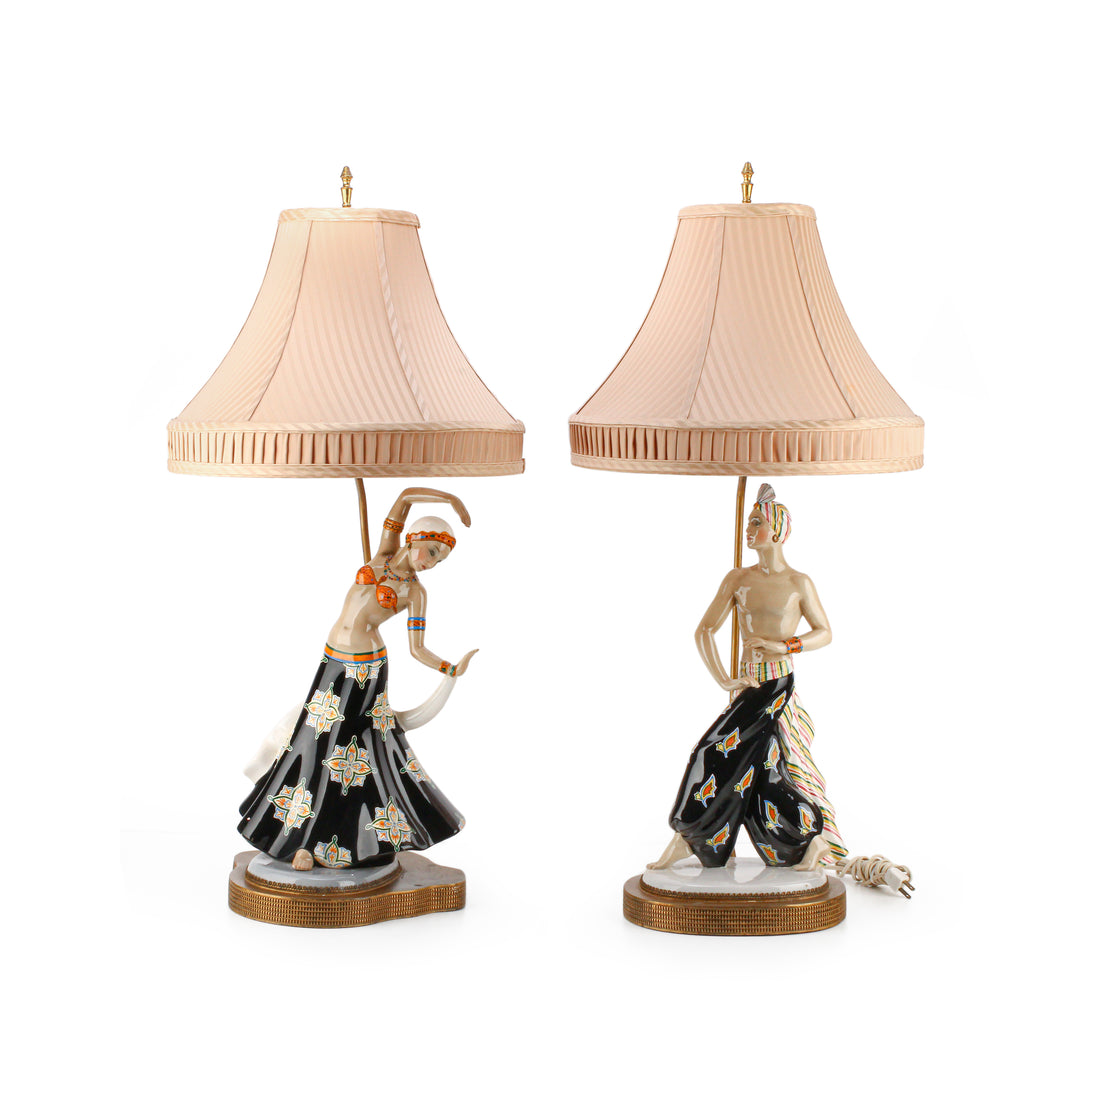 CIA MANNA Figural Table Lamps - Set of 2